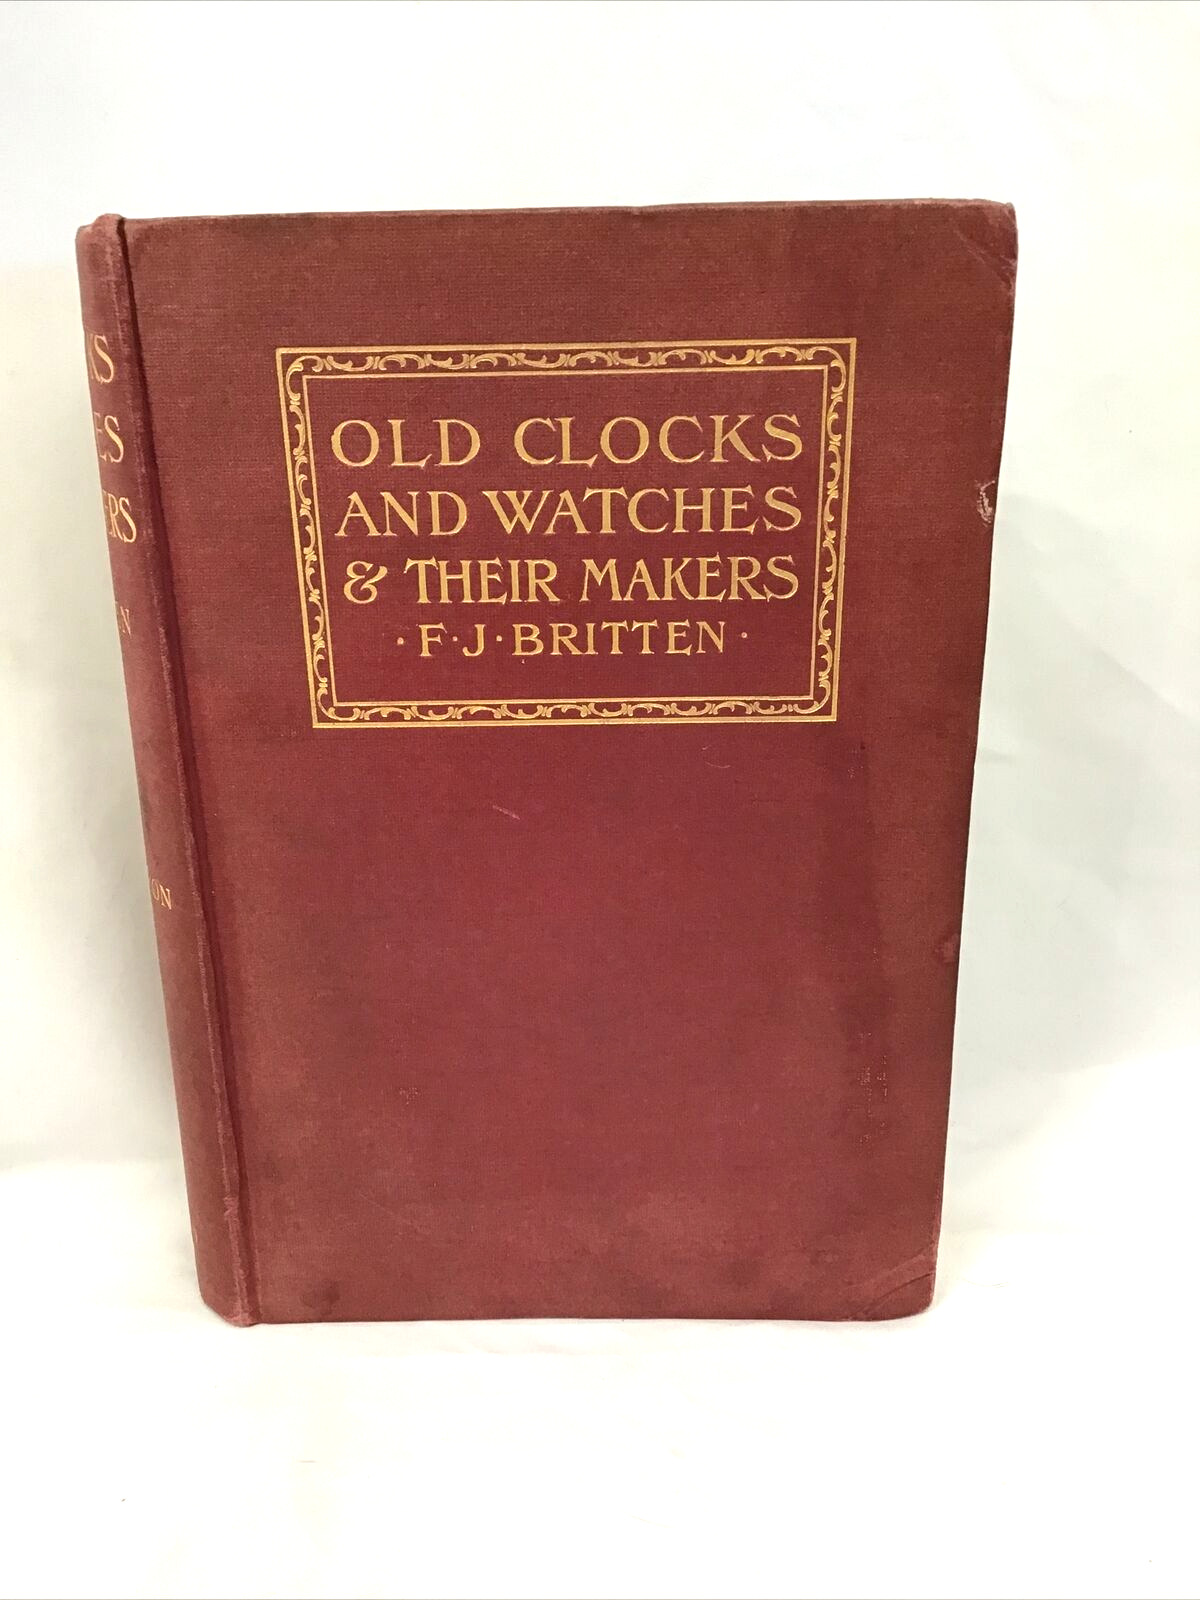 Old Clocks and Watches and Their Makers  F.J. Britten Third Edition 1911 VG